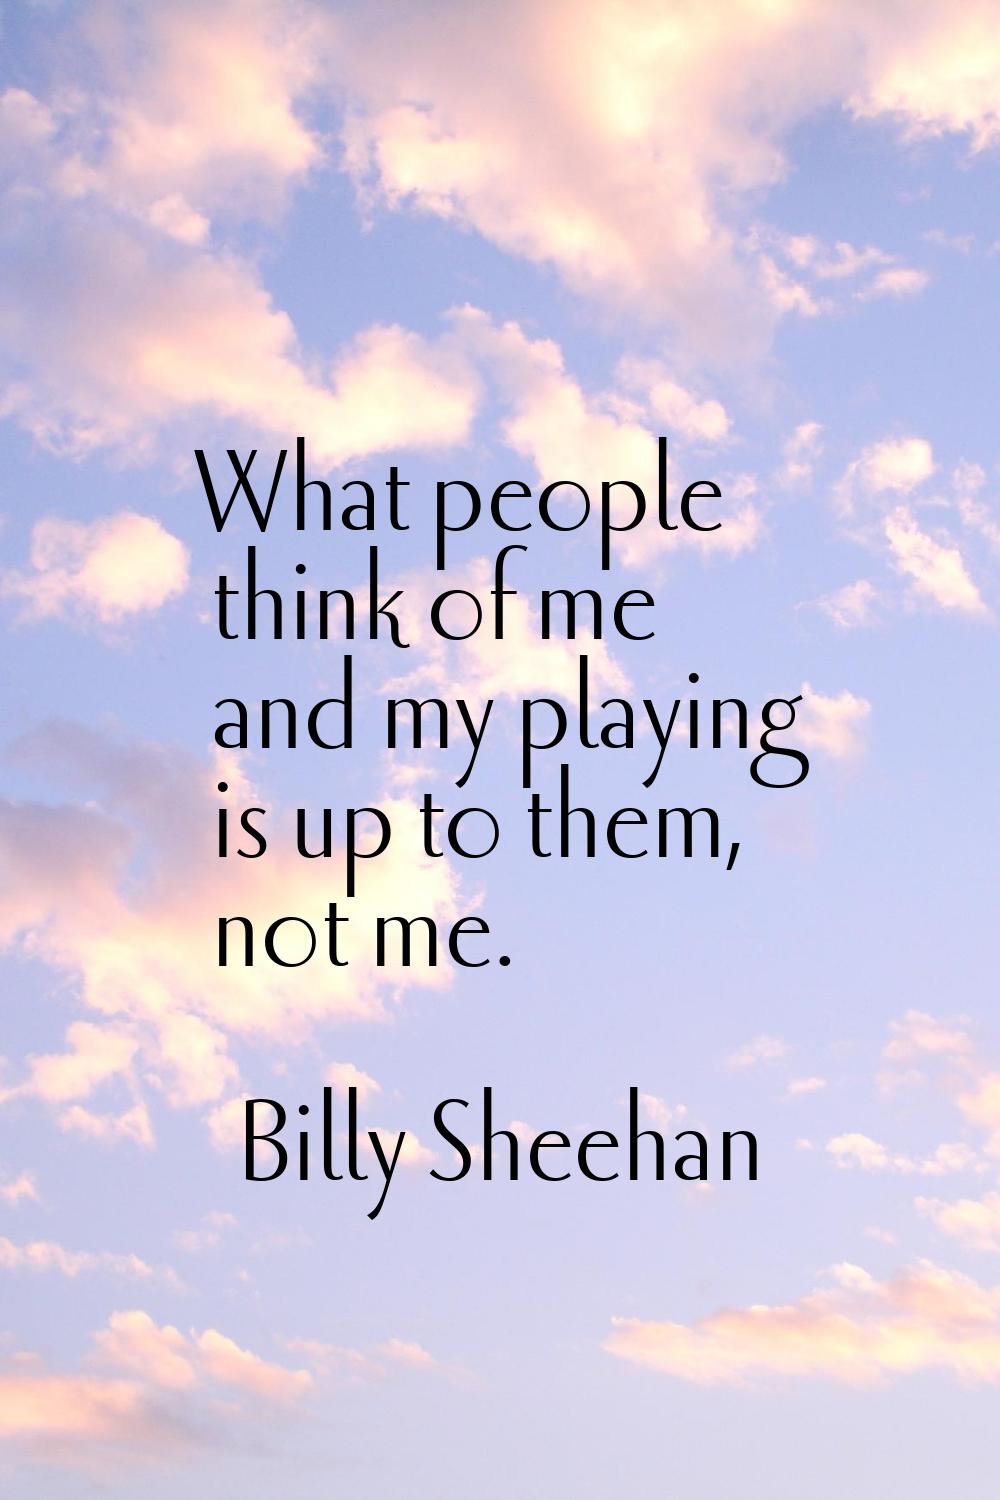 What people think of me and my playing is up to them, not me.